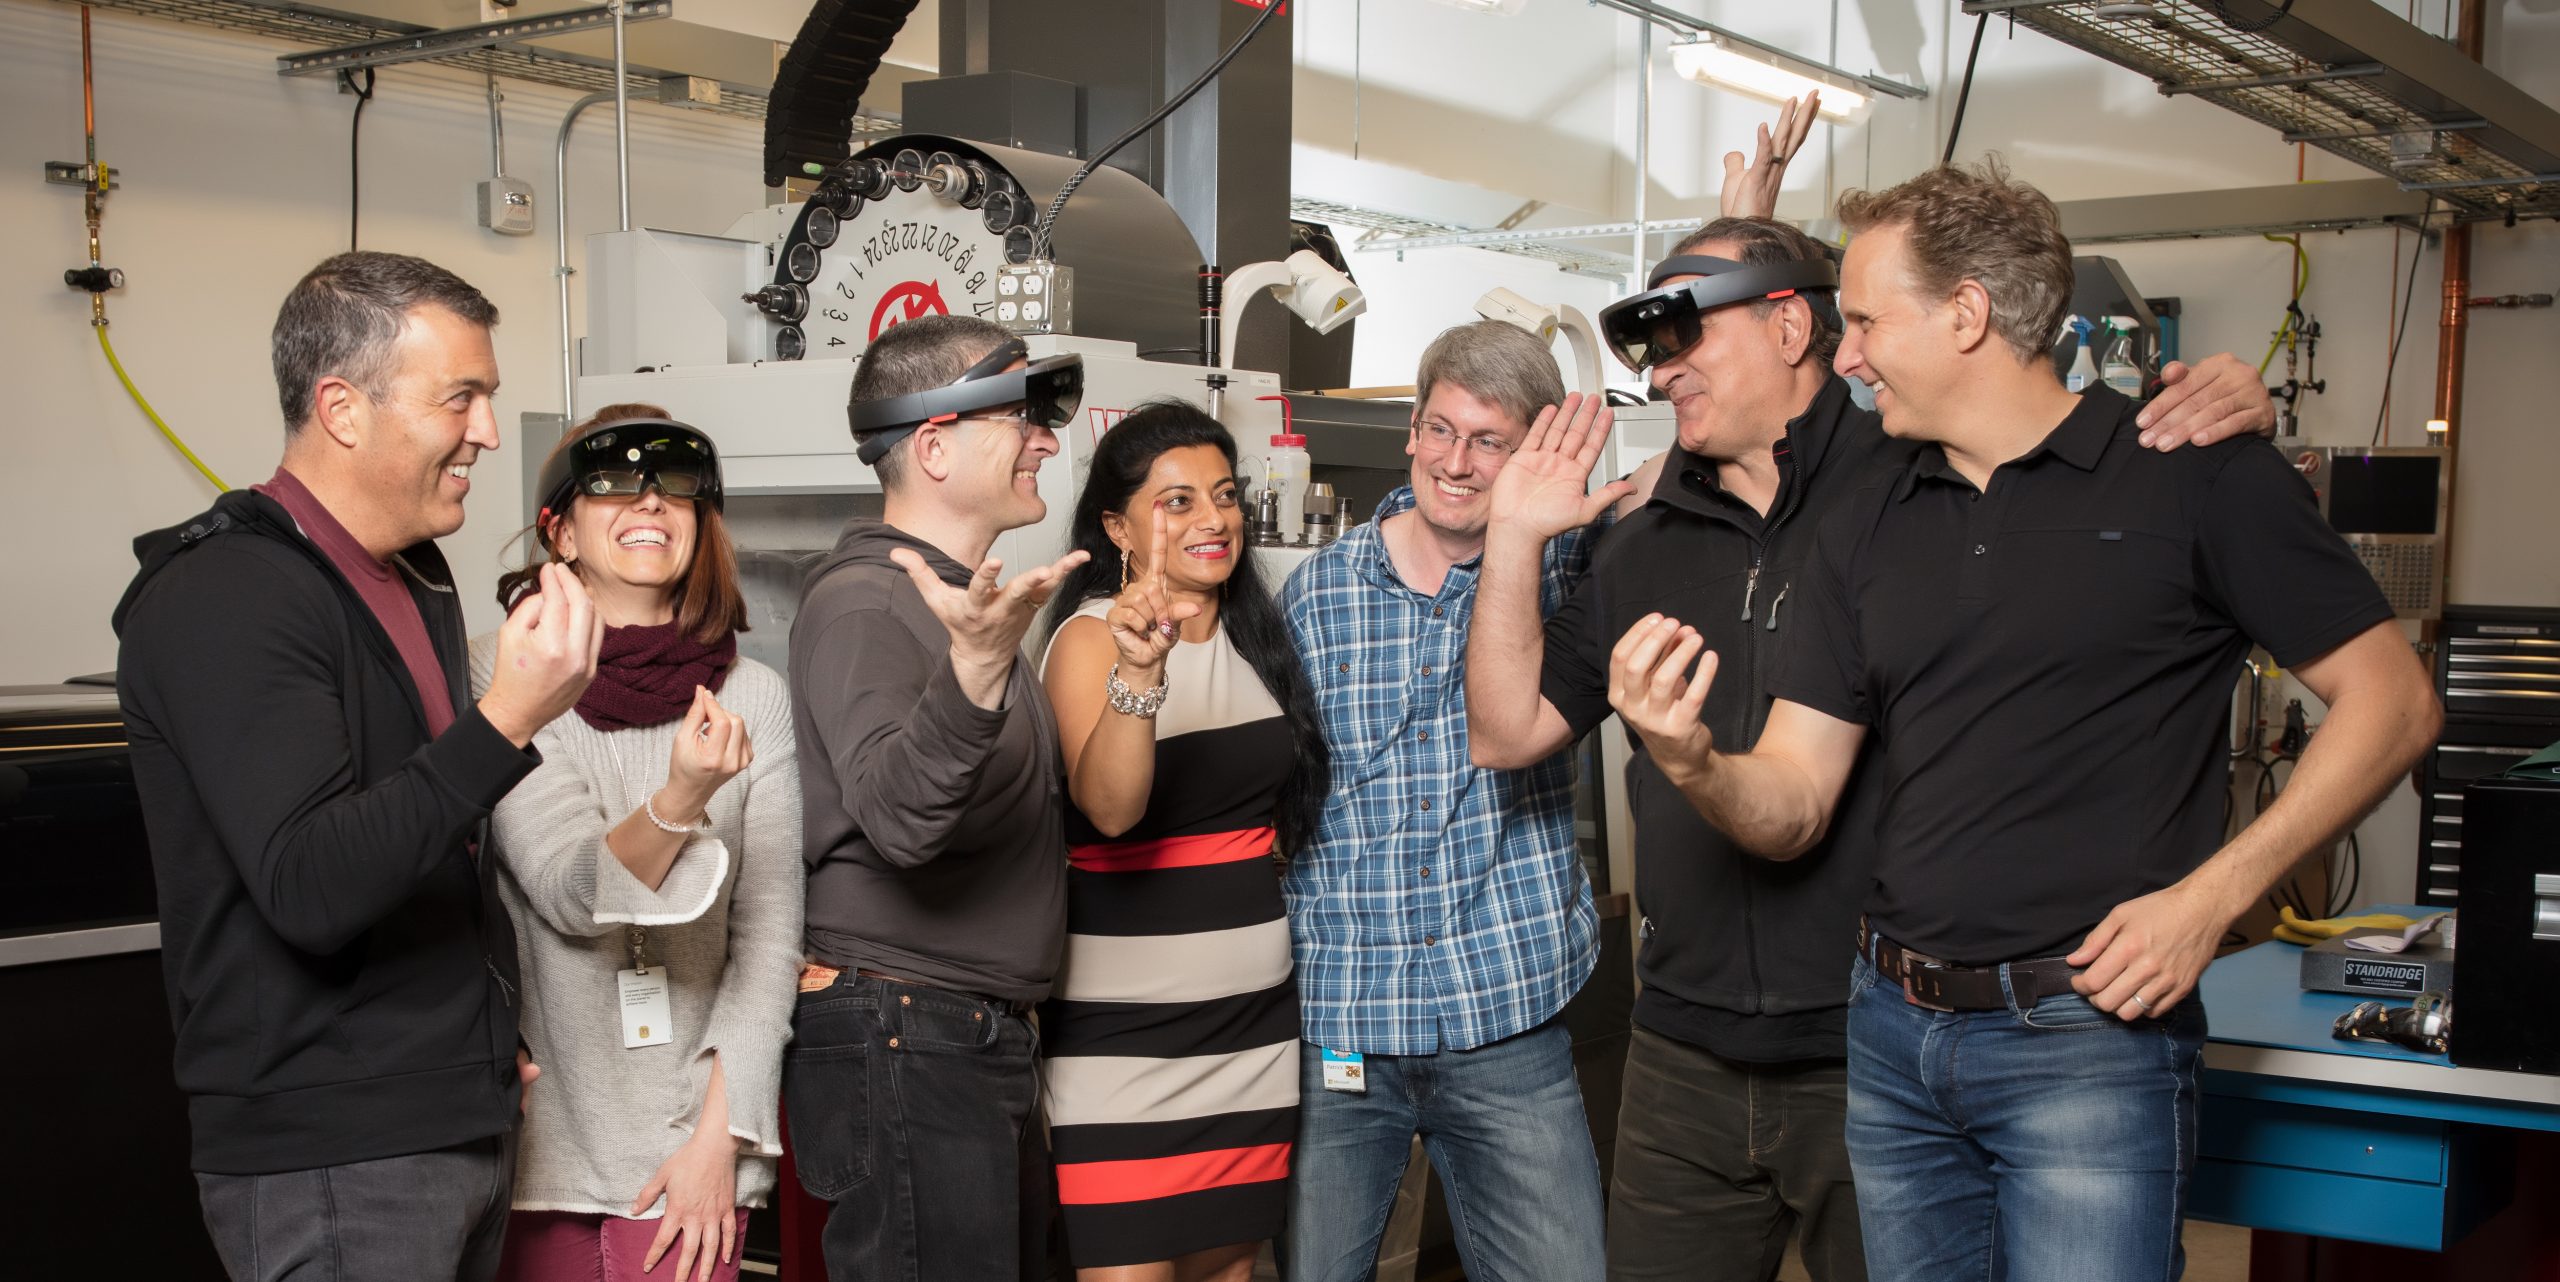 Members of the Silicon Valley HoloLens team.